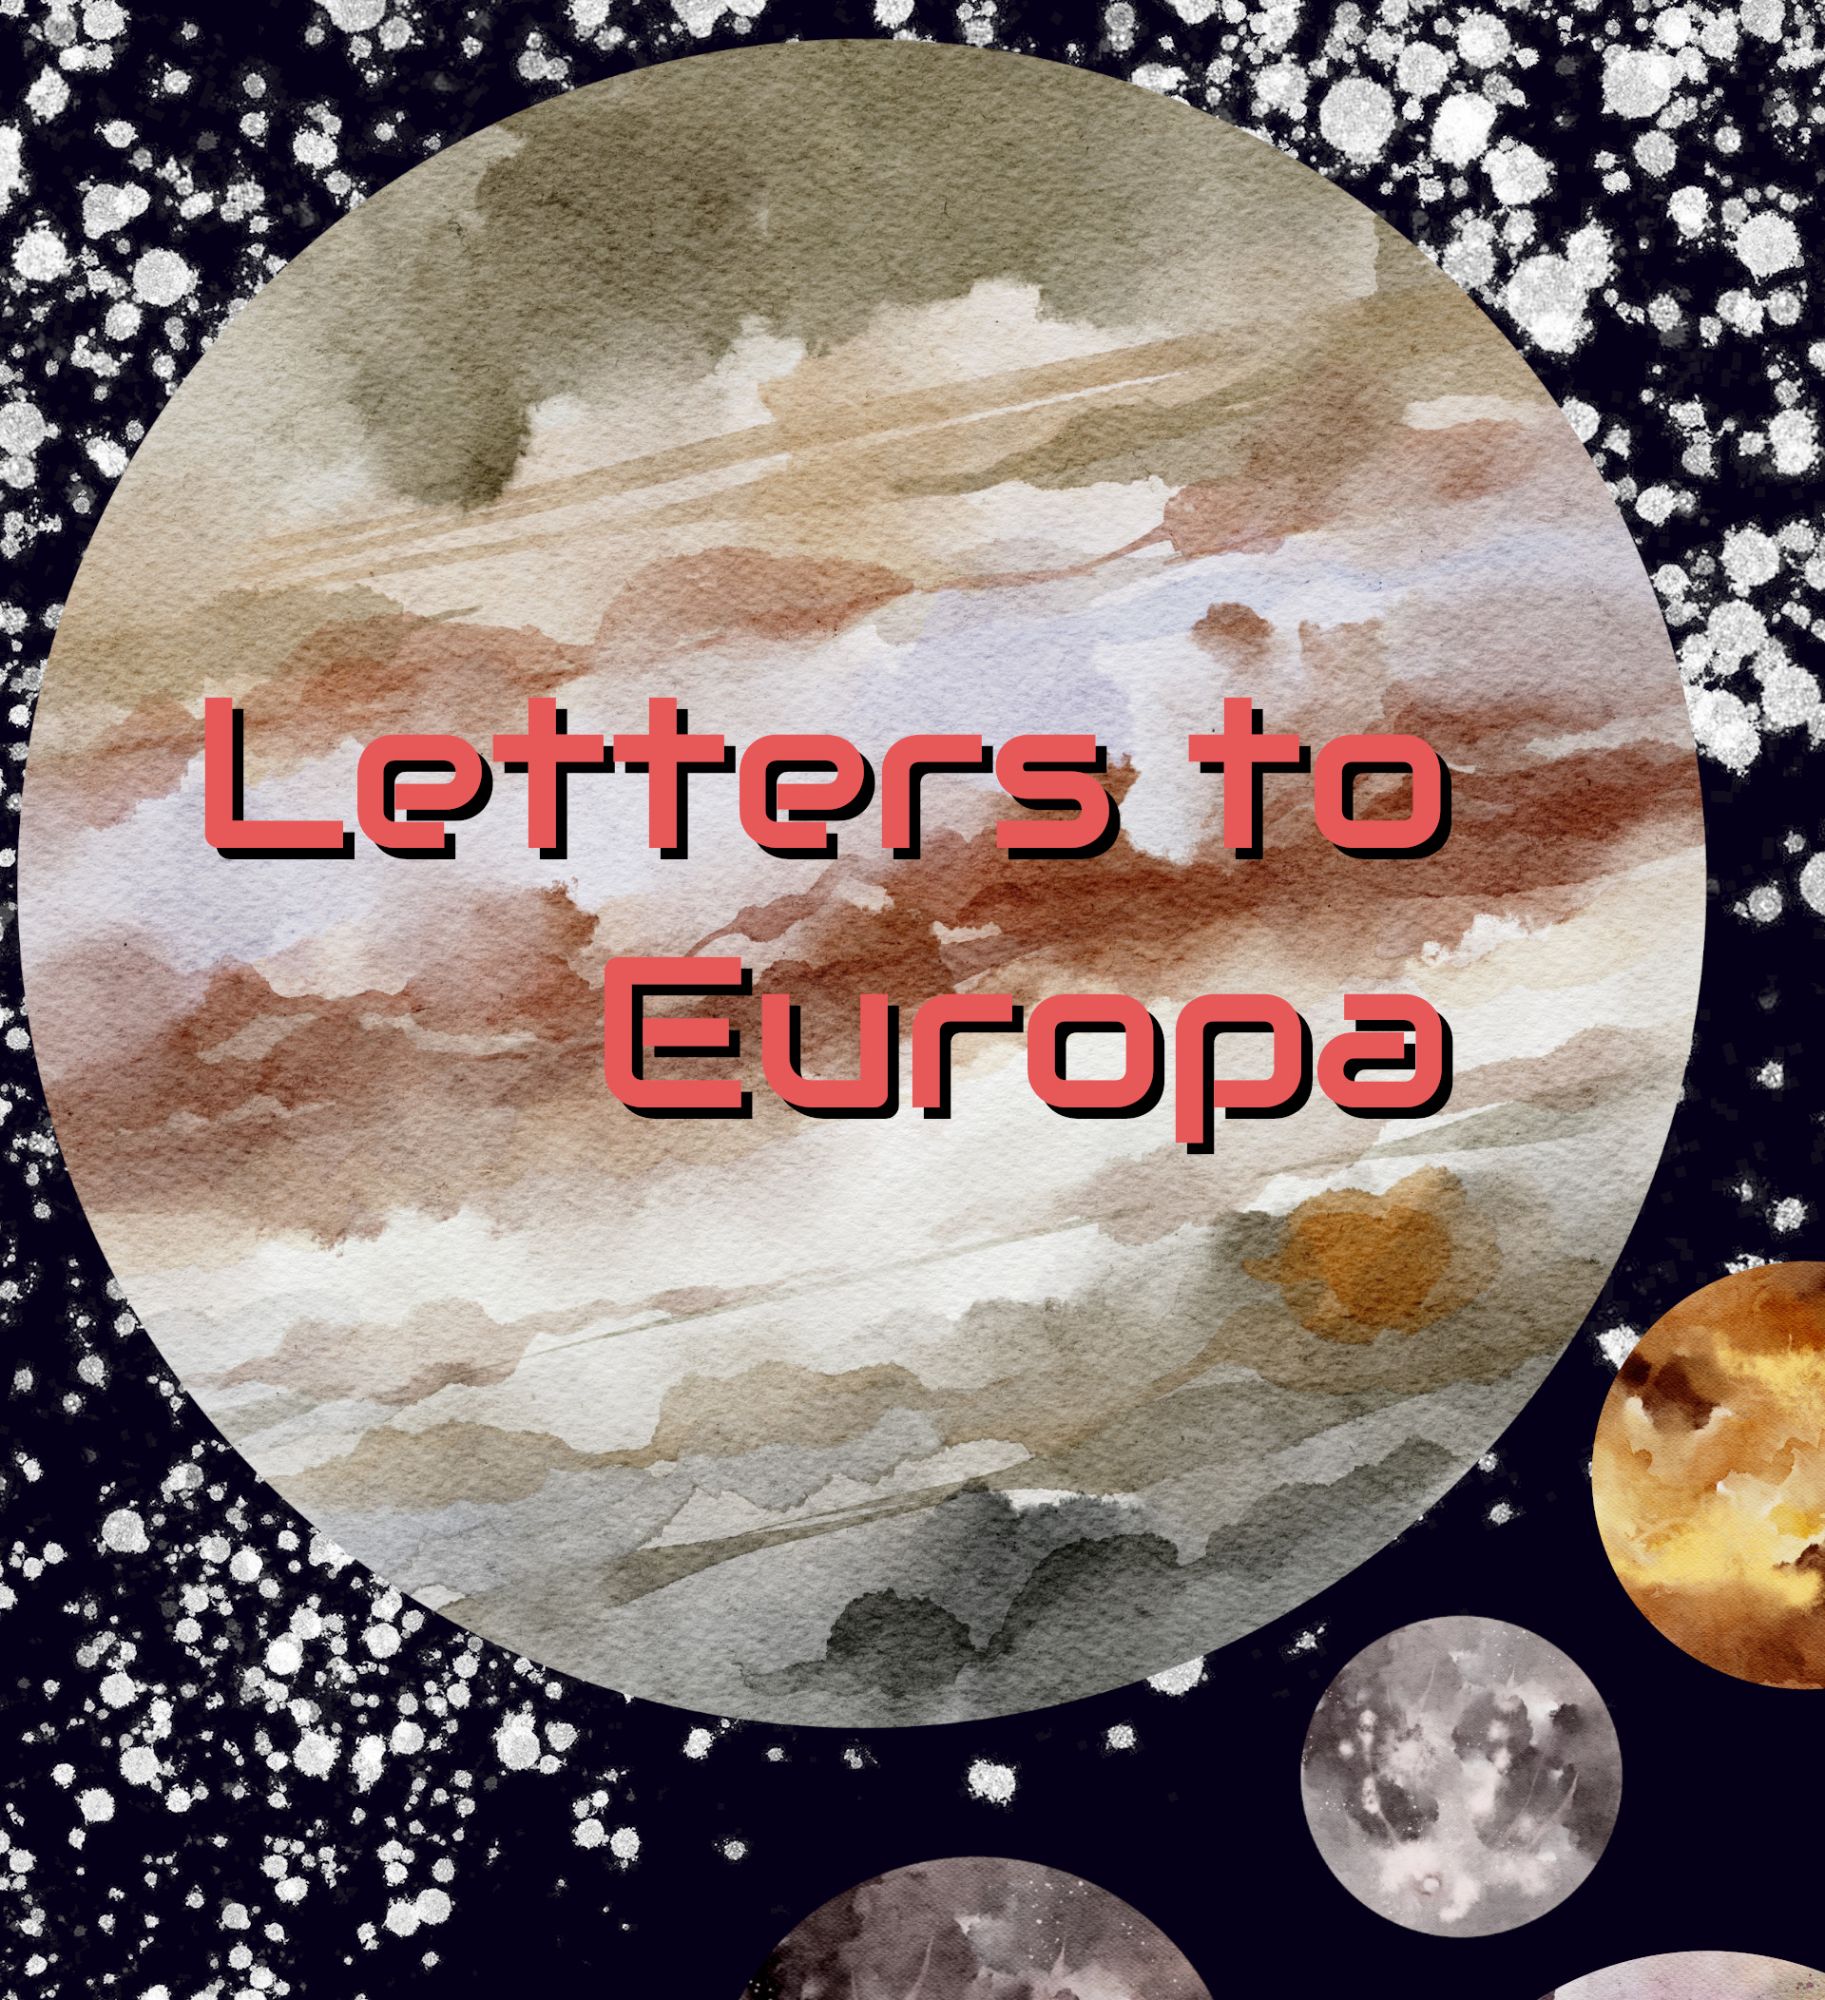 An image of jupiter zoomed in with the text of Letter of Europa